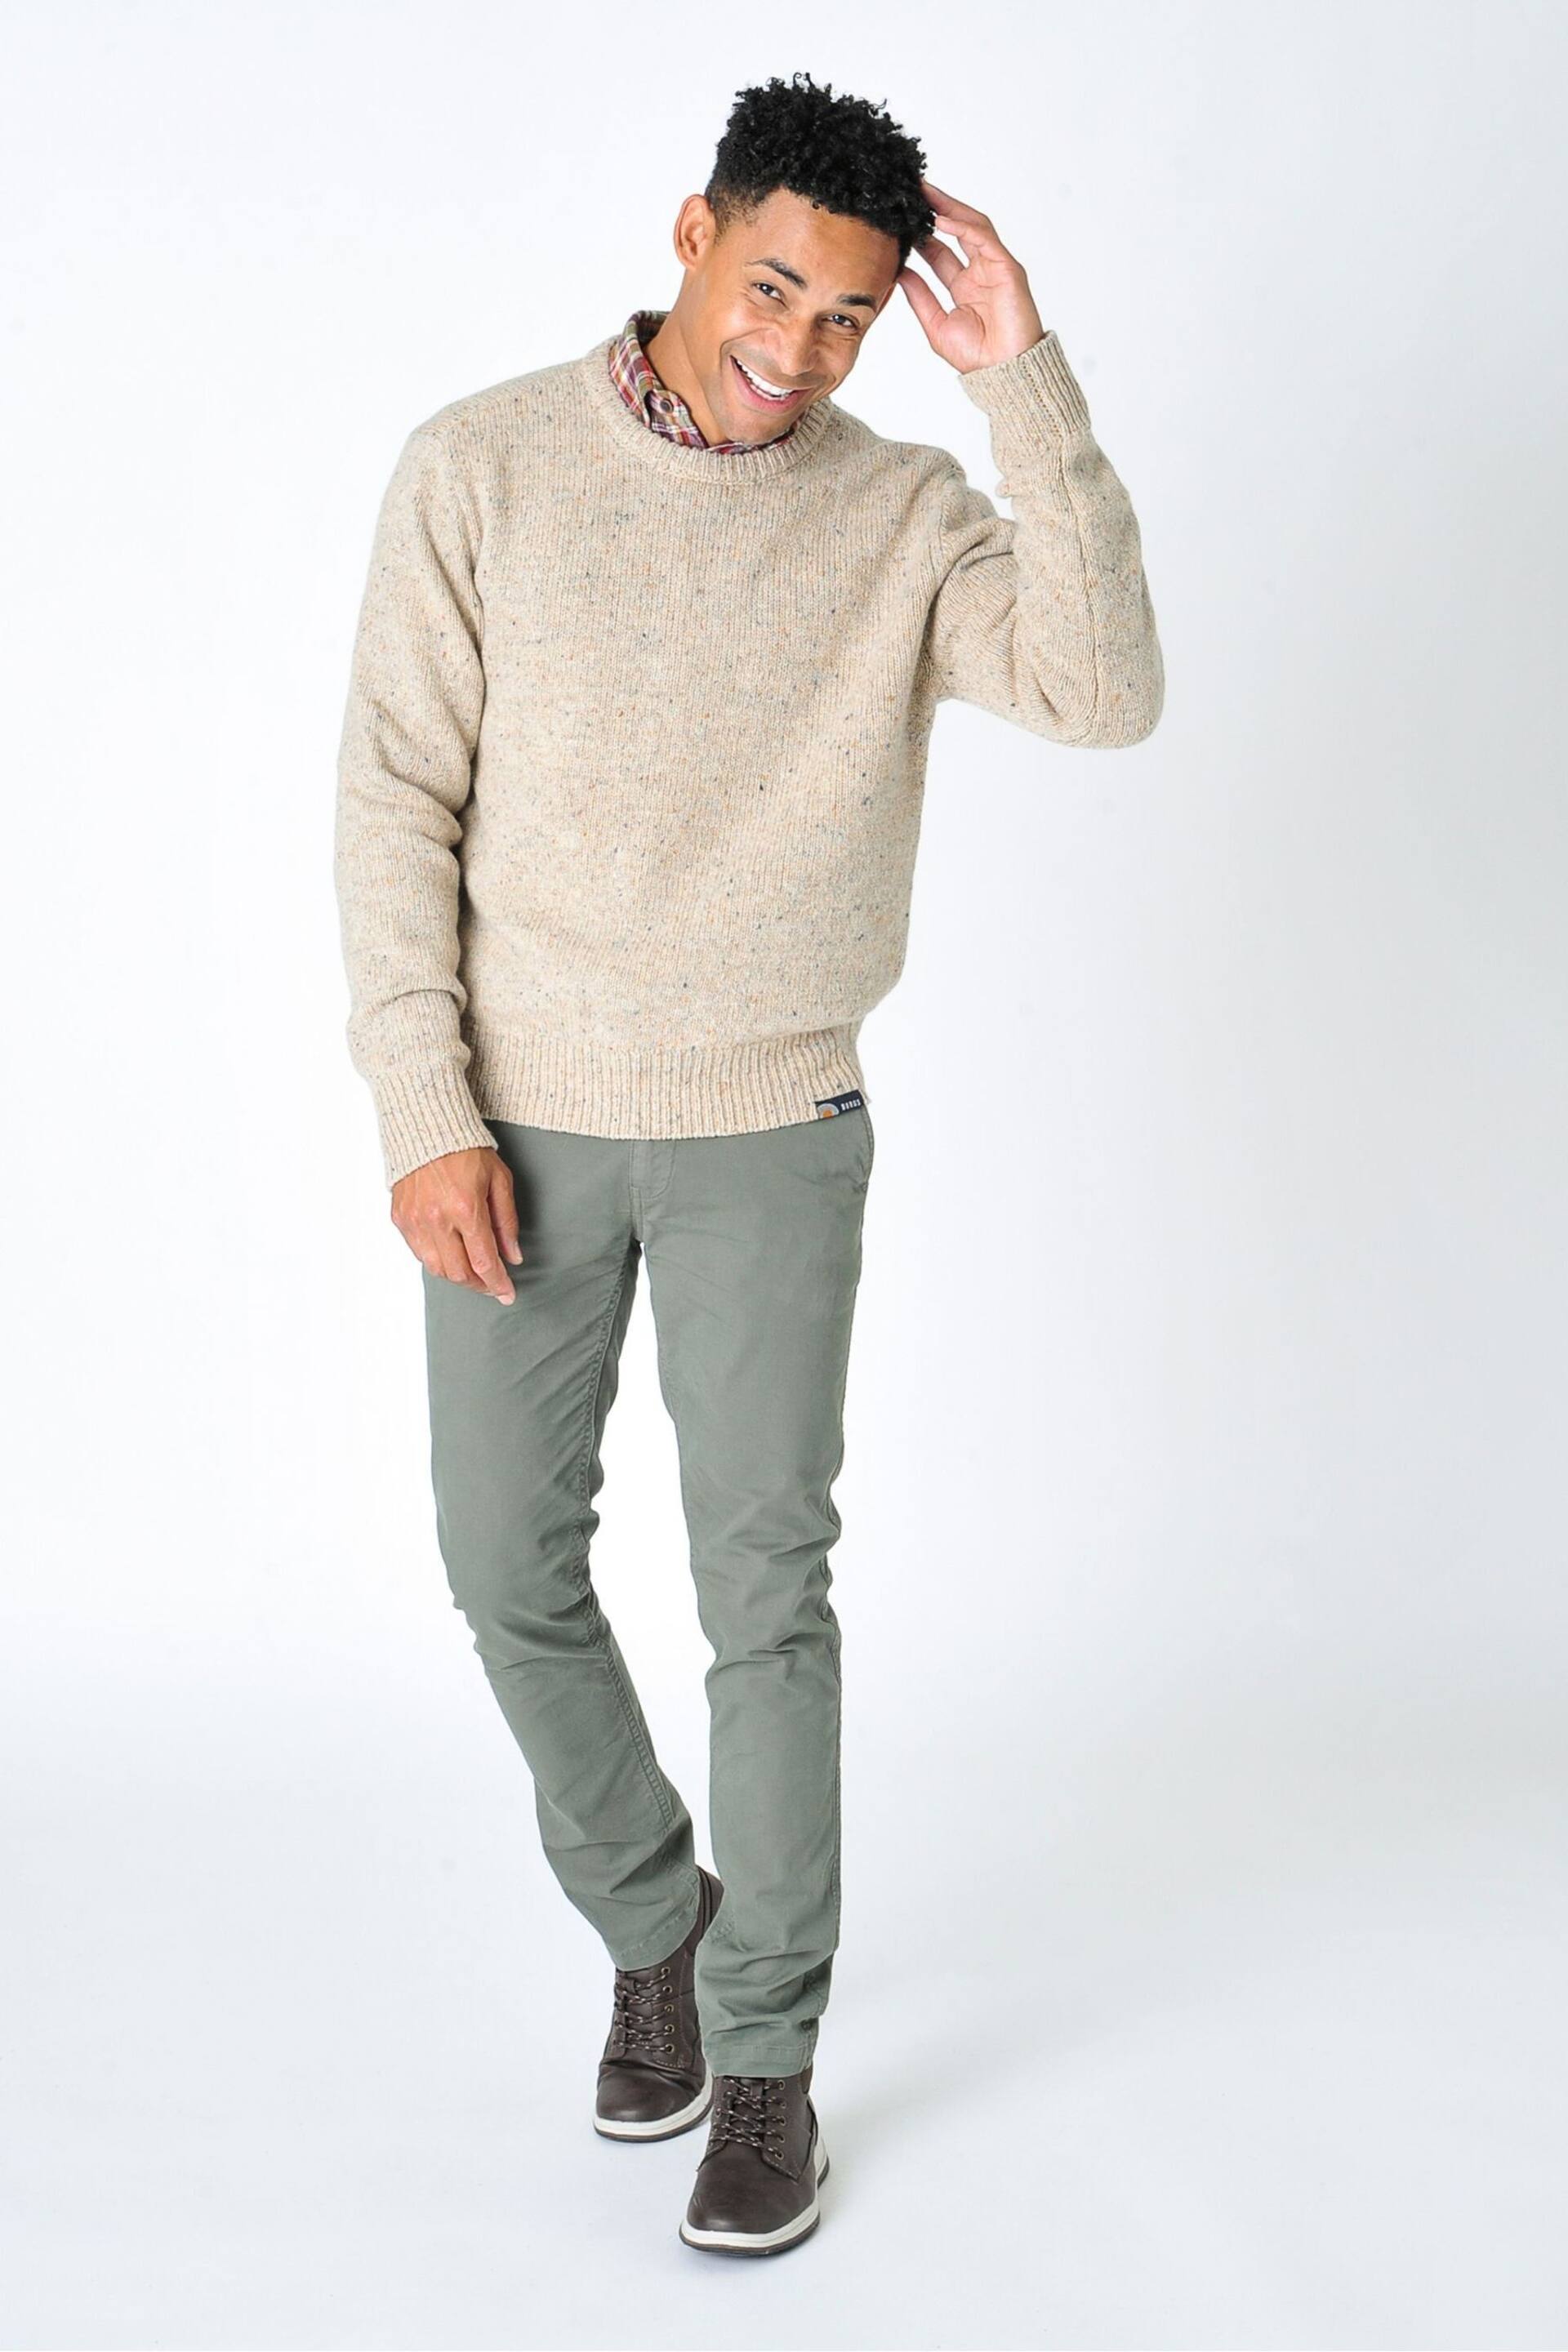 Burgs Mornick Mens Rich Neppy Knit Crew Neck Jumper - Image 4 of 6